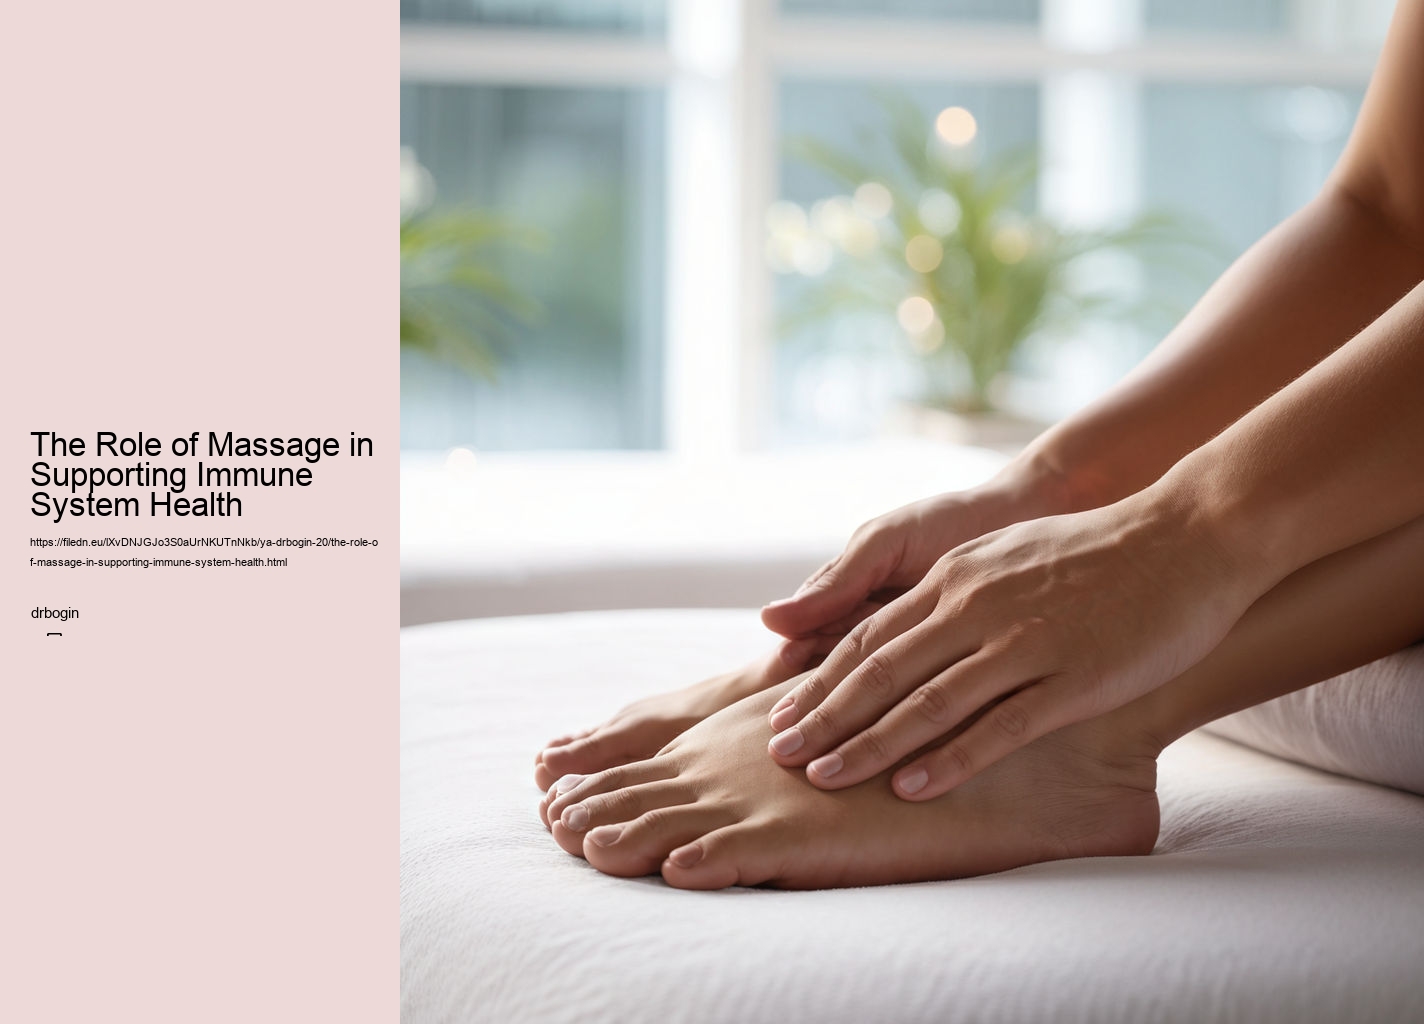 The Role of Massage in Supporting Immune System Health